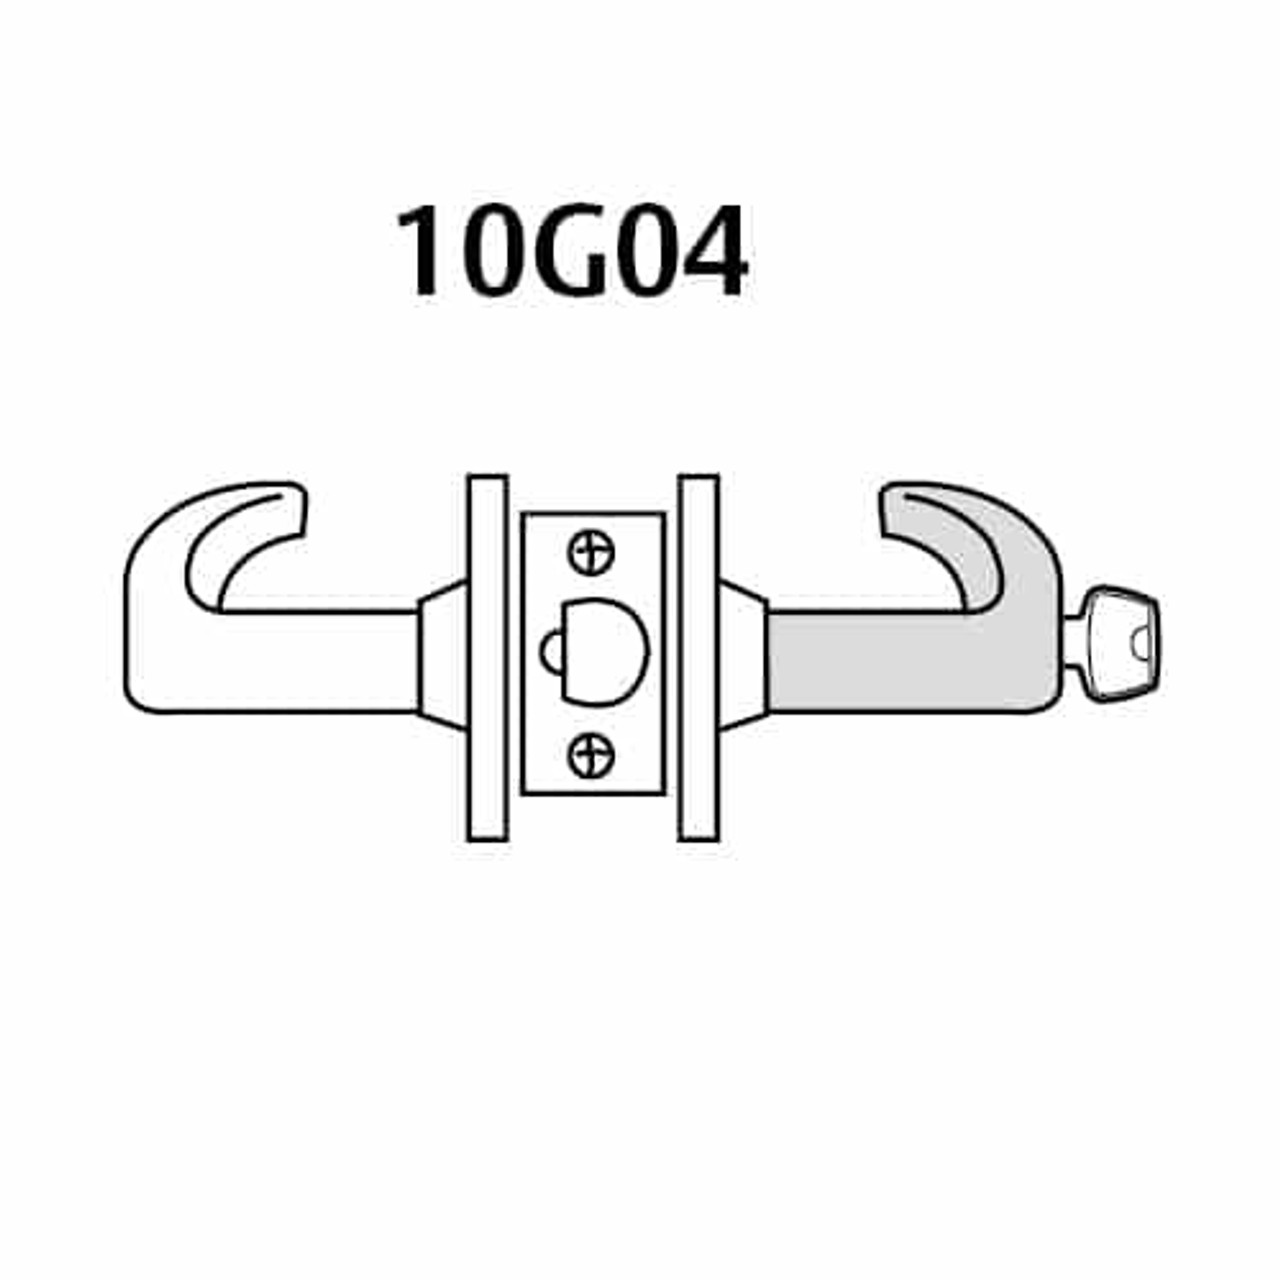 2870-10G04-LB-04 Sargent 10 Line Cylindrical Storeroom/Closet Locks with B Lever Design and L Rose Prepped for SFIC in Satin Brass